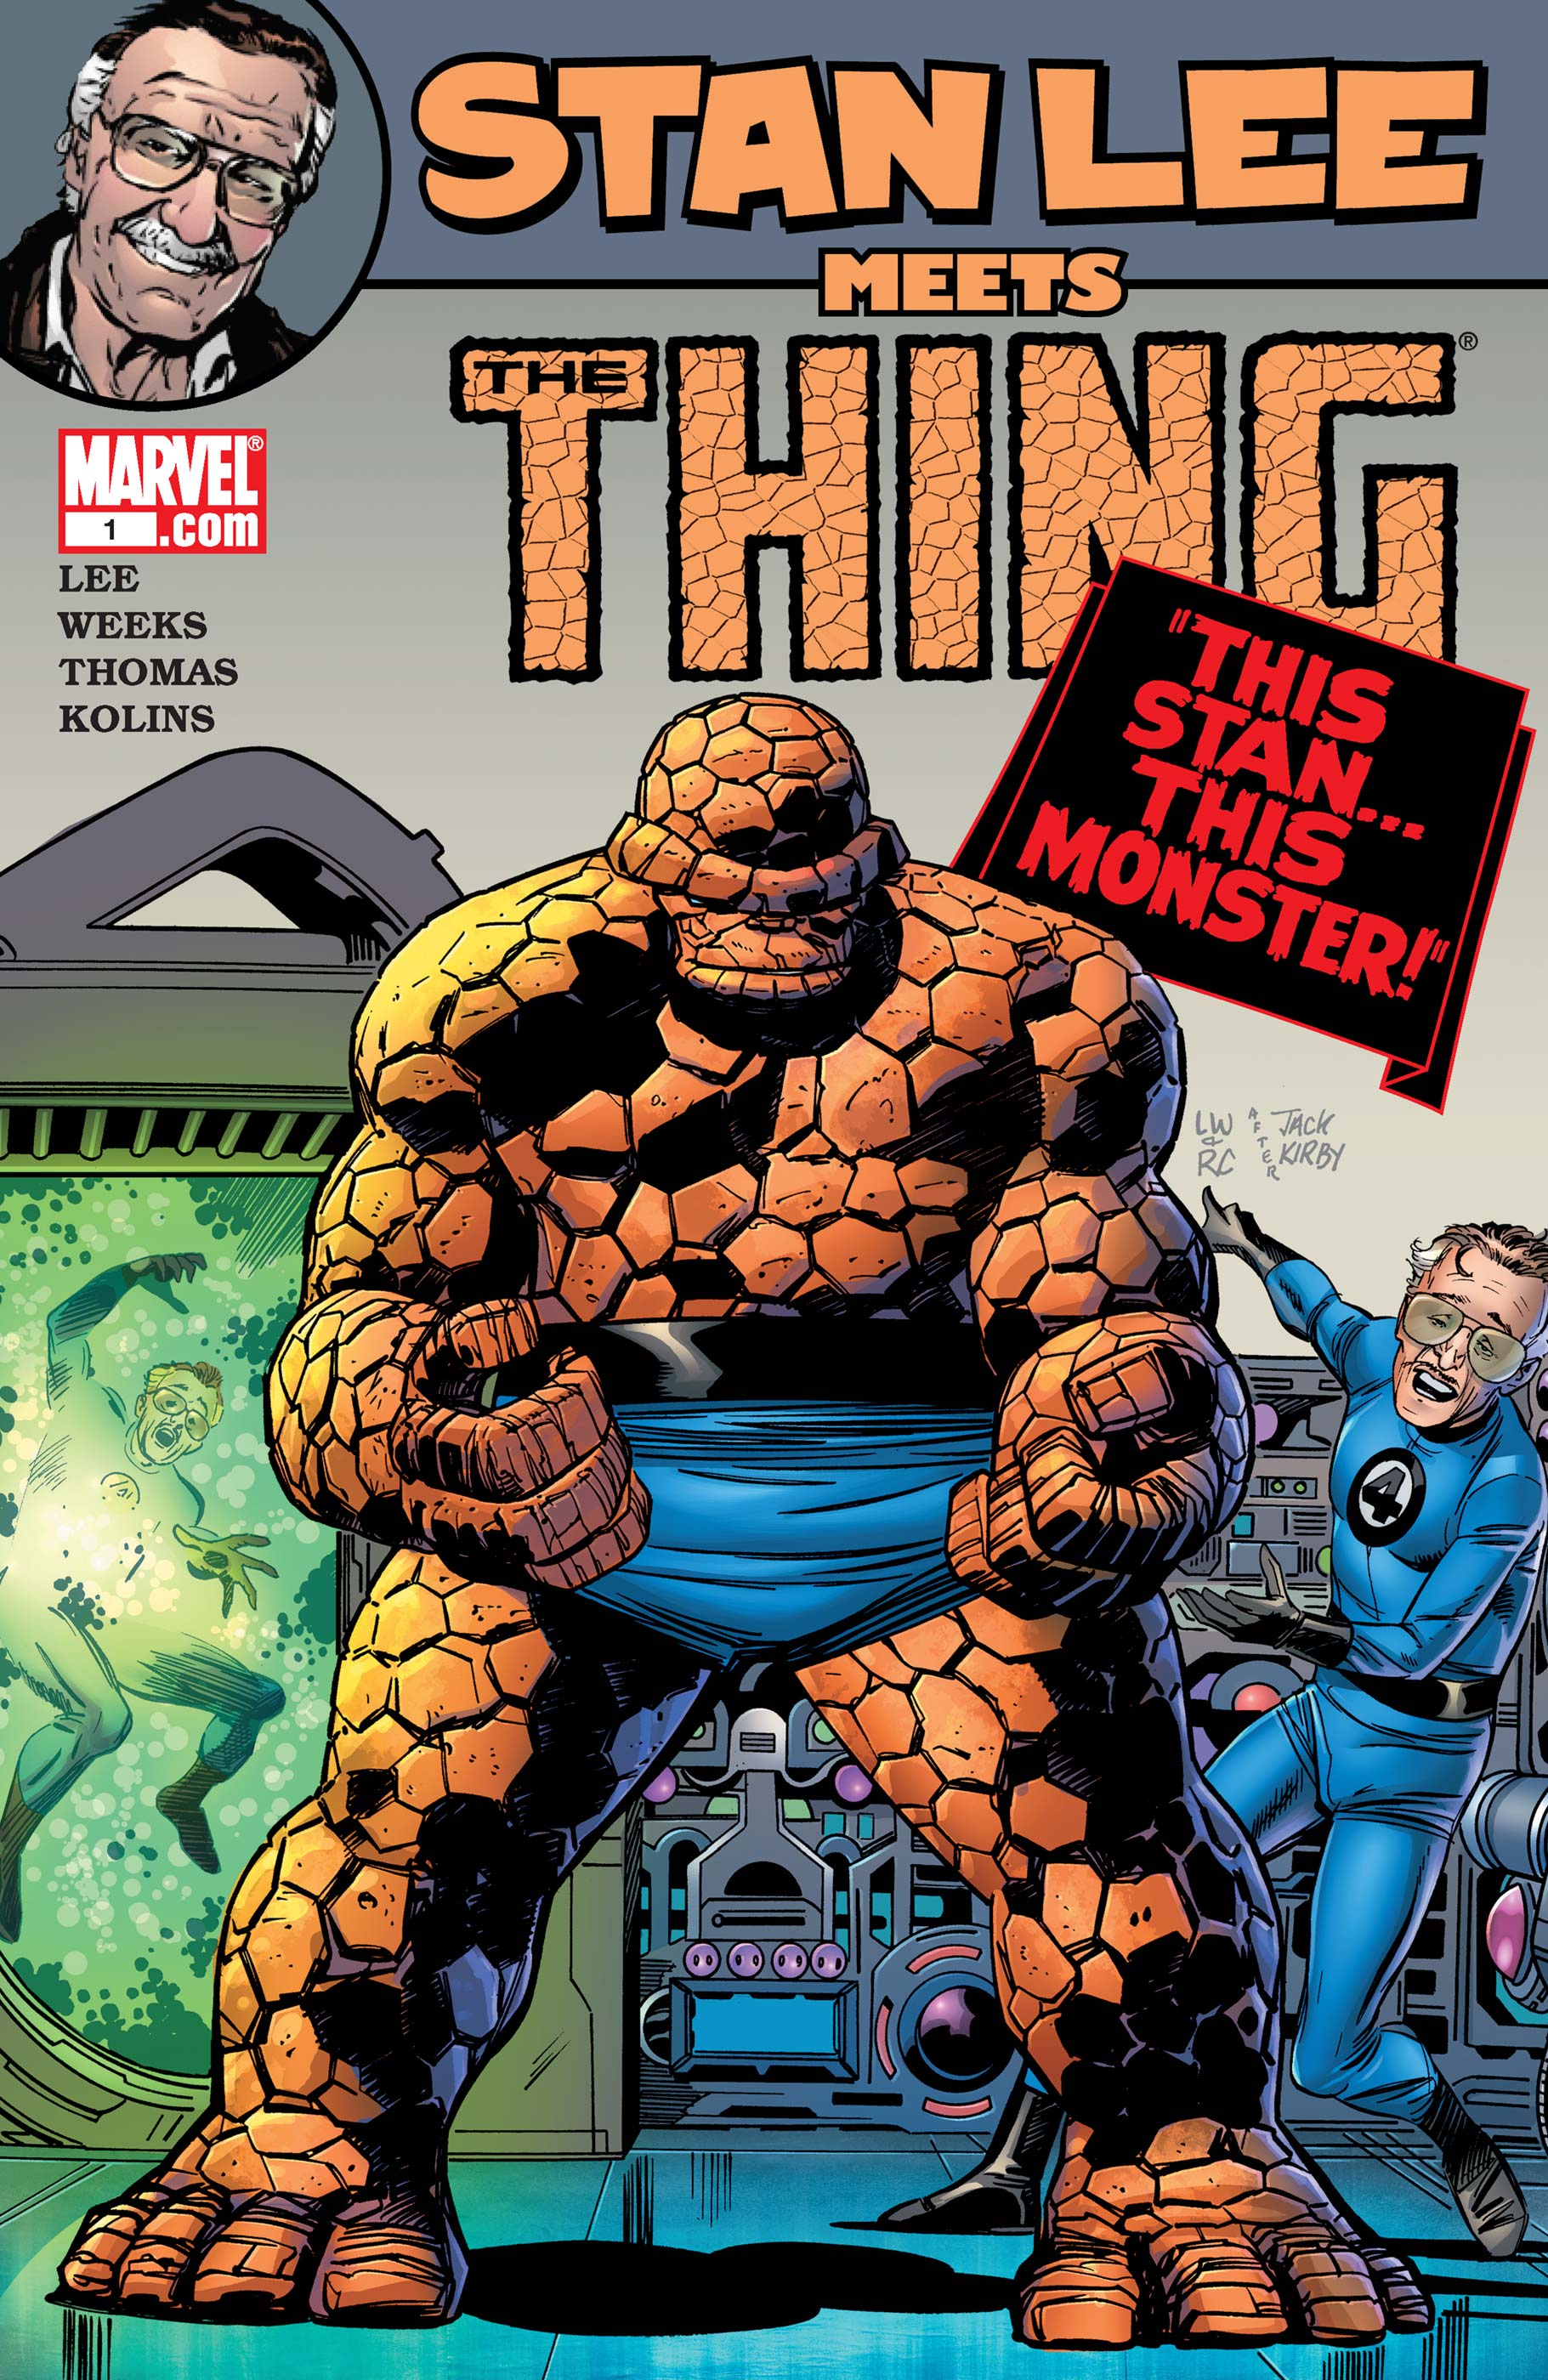 Stan Lee Meets the Thing (2006) #1